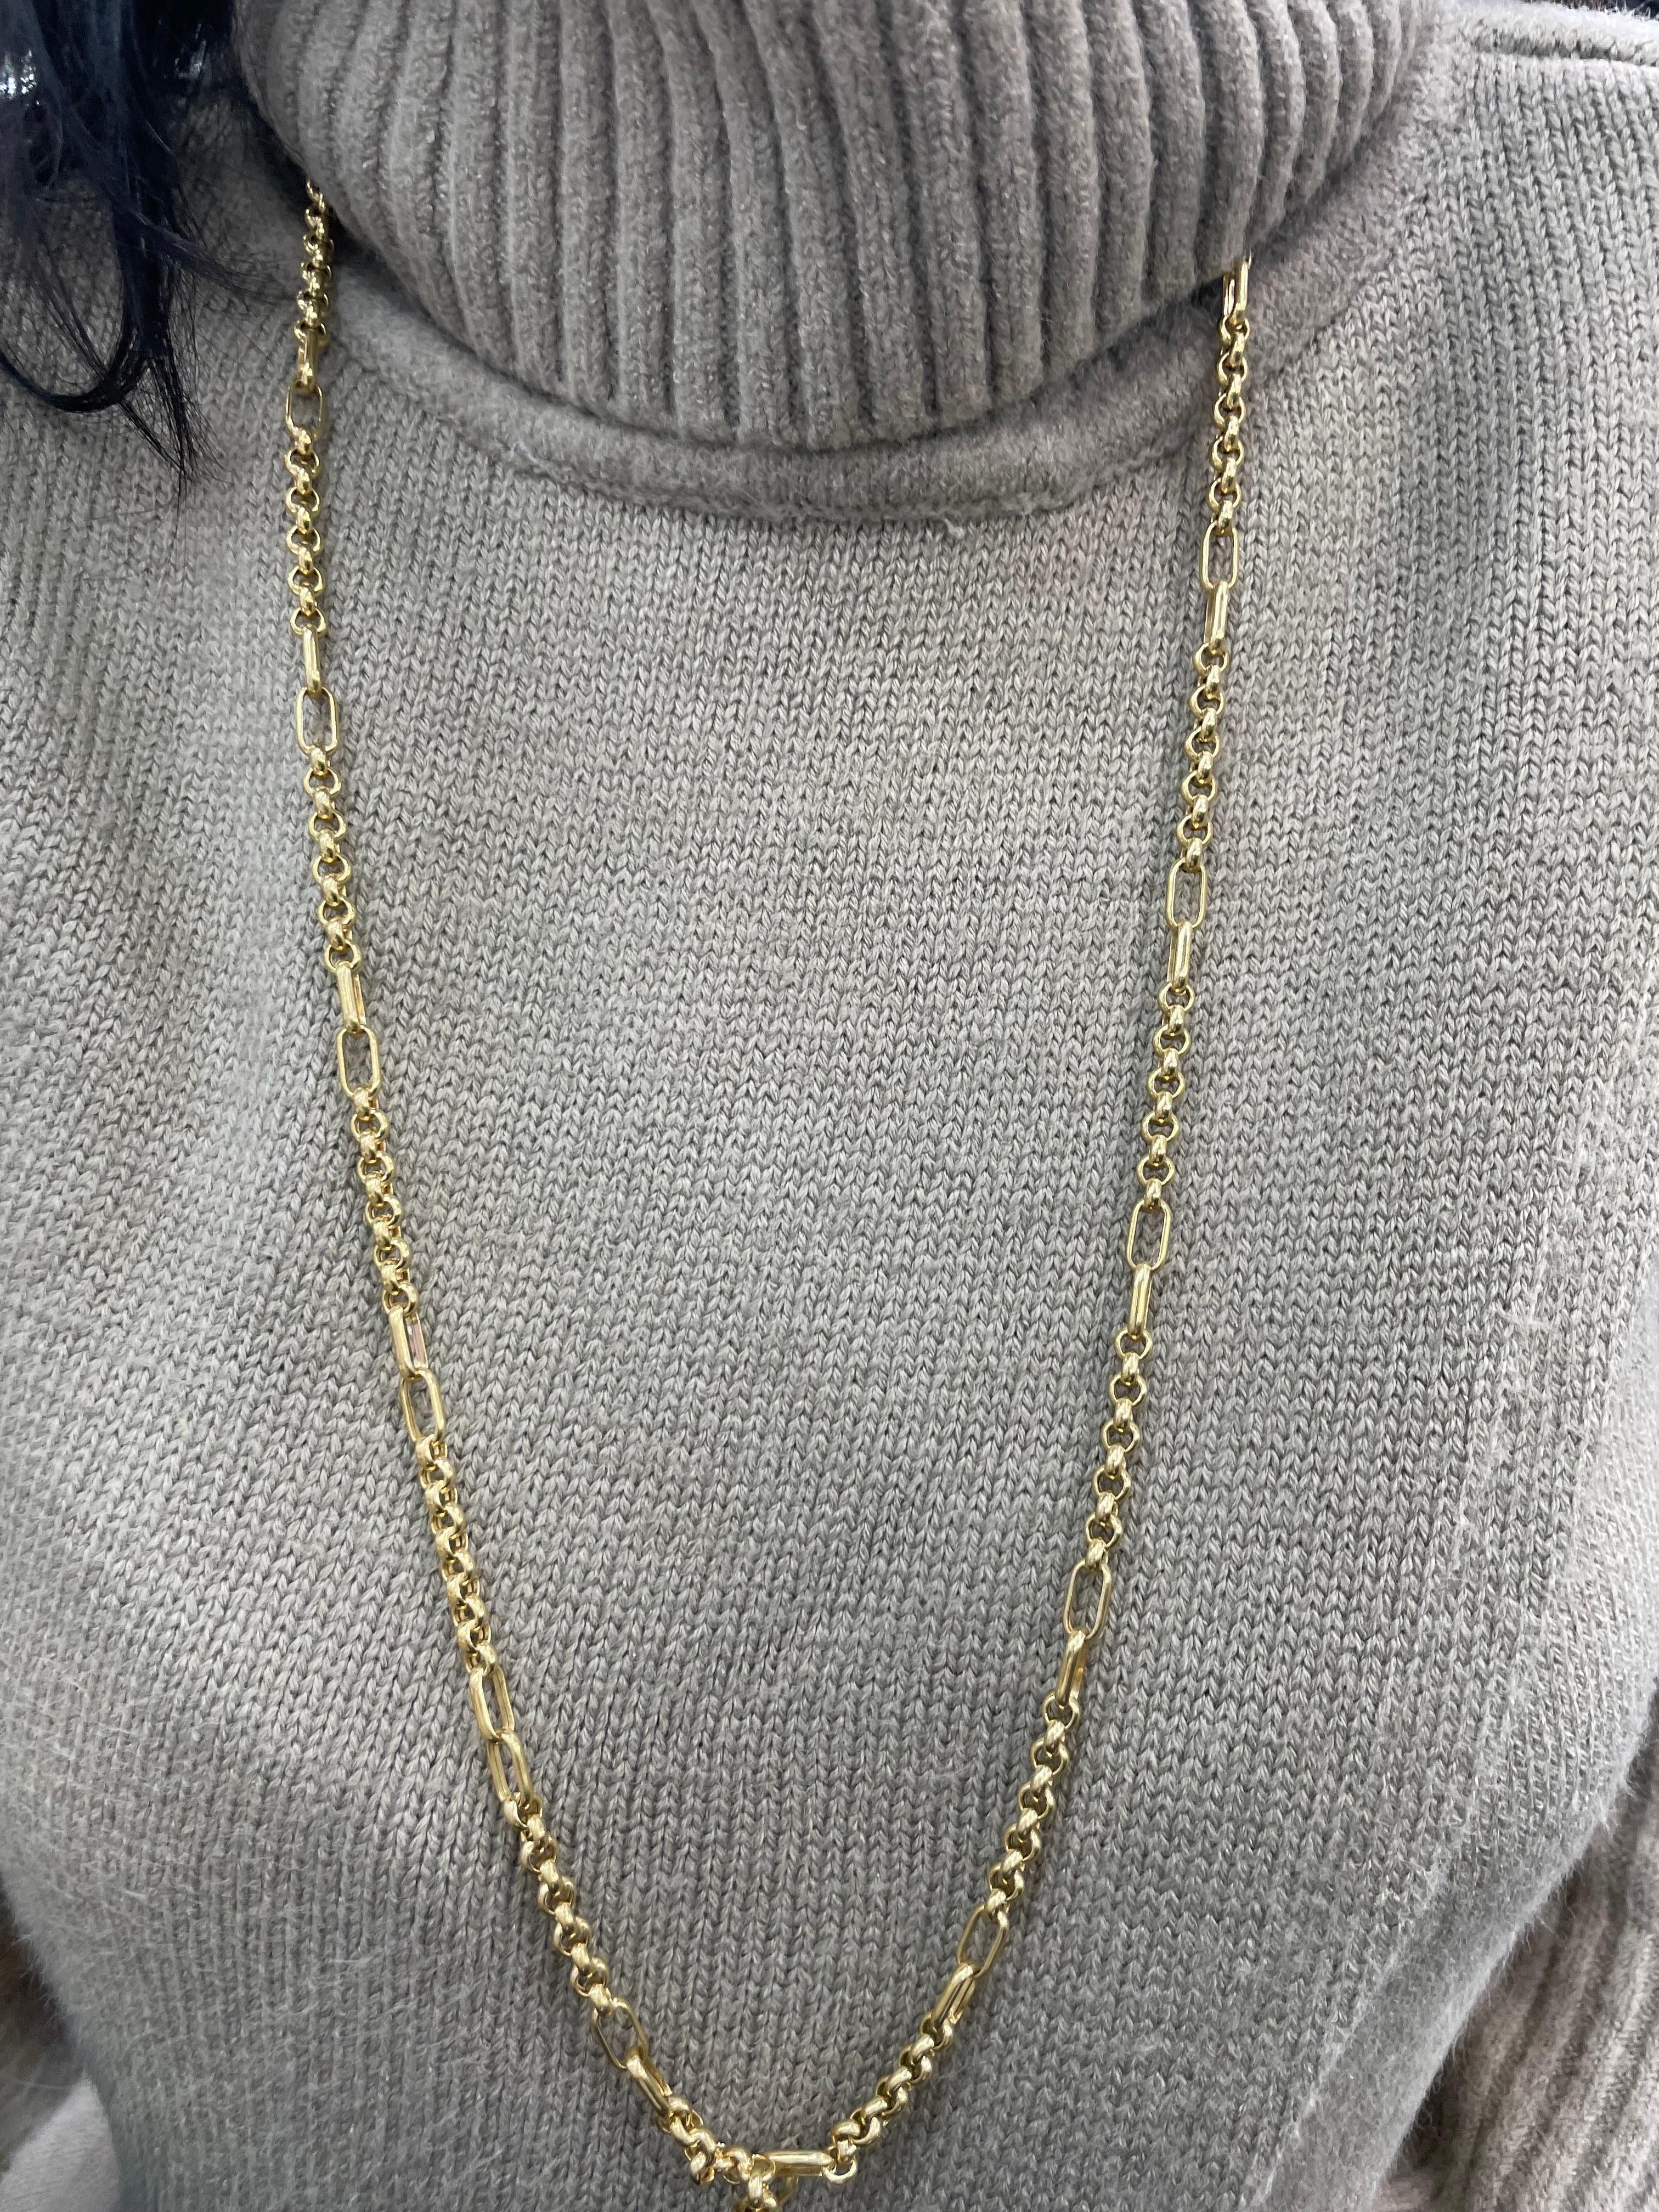 14 Karat Yellow Gold link necklace weighing 25.6 grams and 36.5 inches.
Can be wrapped twice around the neck.